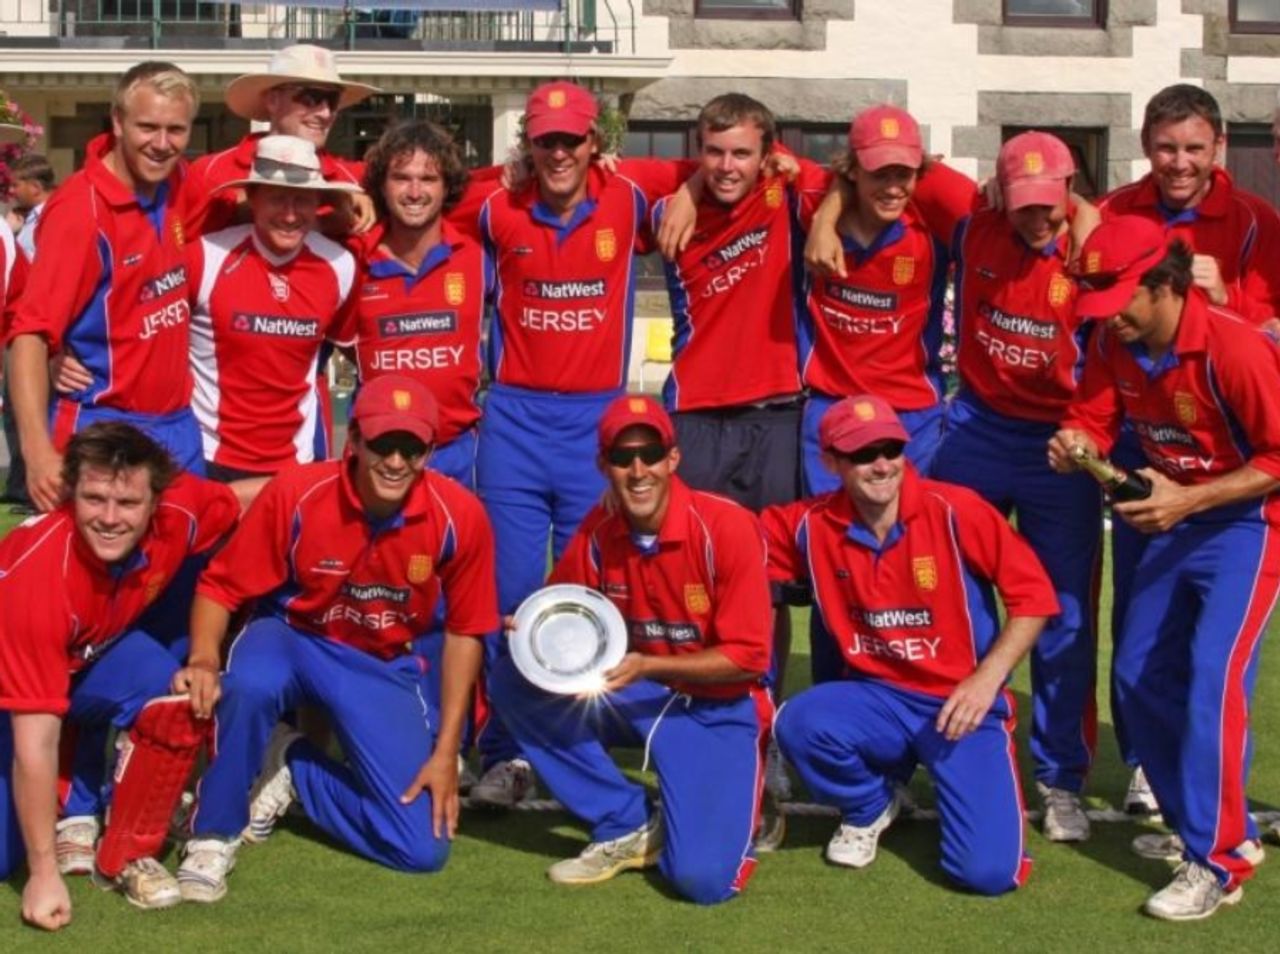 The victorious Jersey team pose with the European Division One cup, July 22, 2010